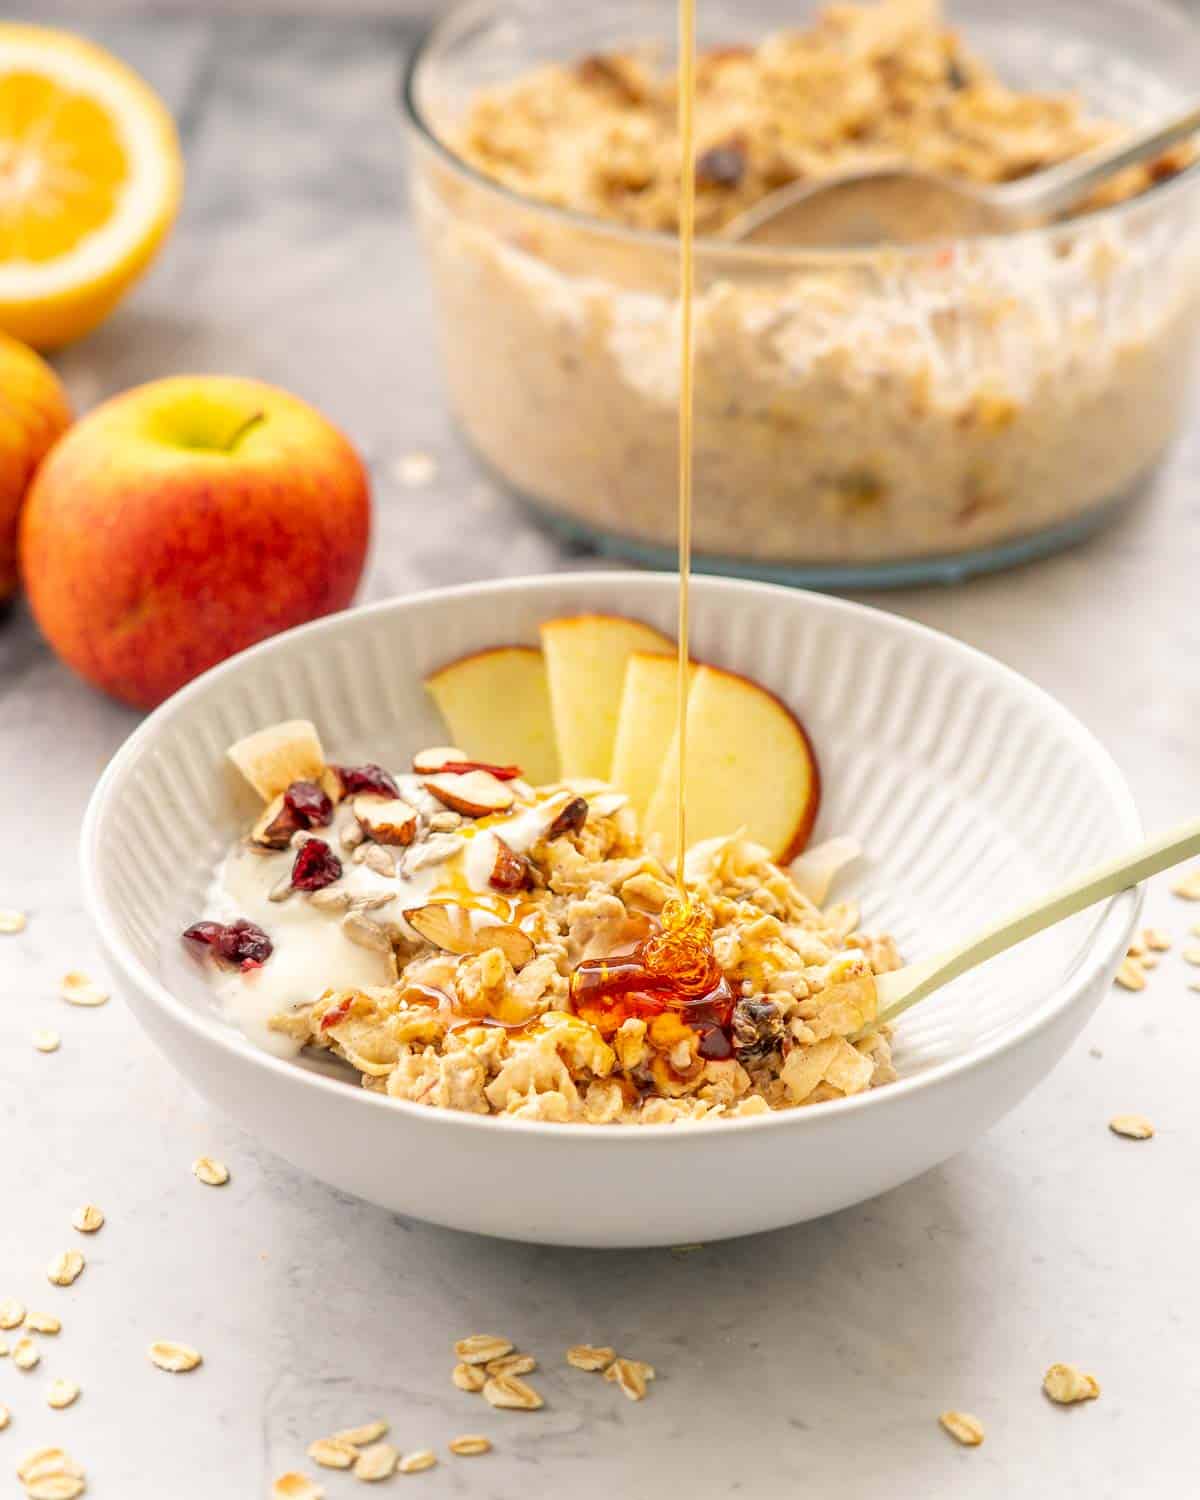 A dessert bowl with a serving of Bircher Muesli and sliced apples and drizzled honey sitting on the bench with a large serving dish in the background filled with Bircher Muesli in the background next to some red apples.